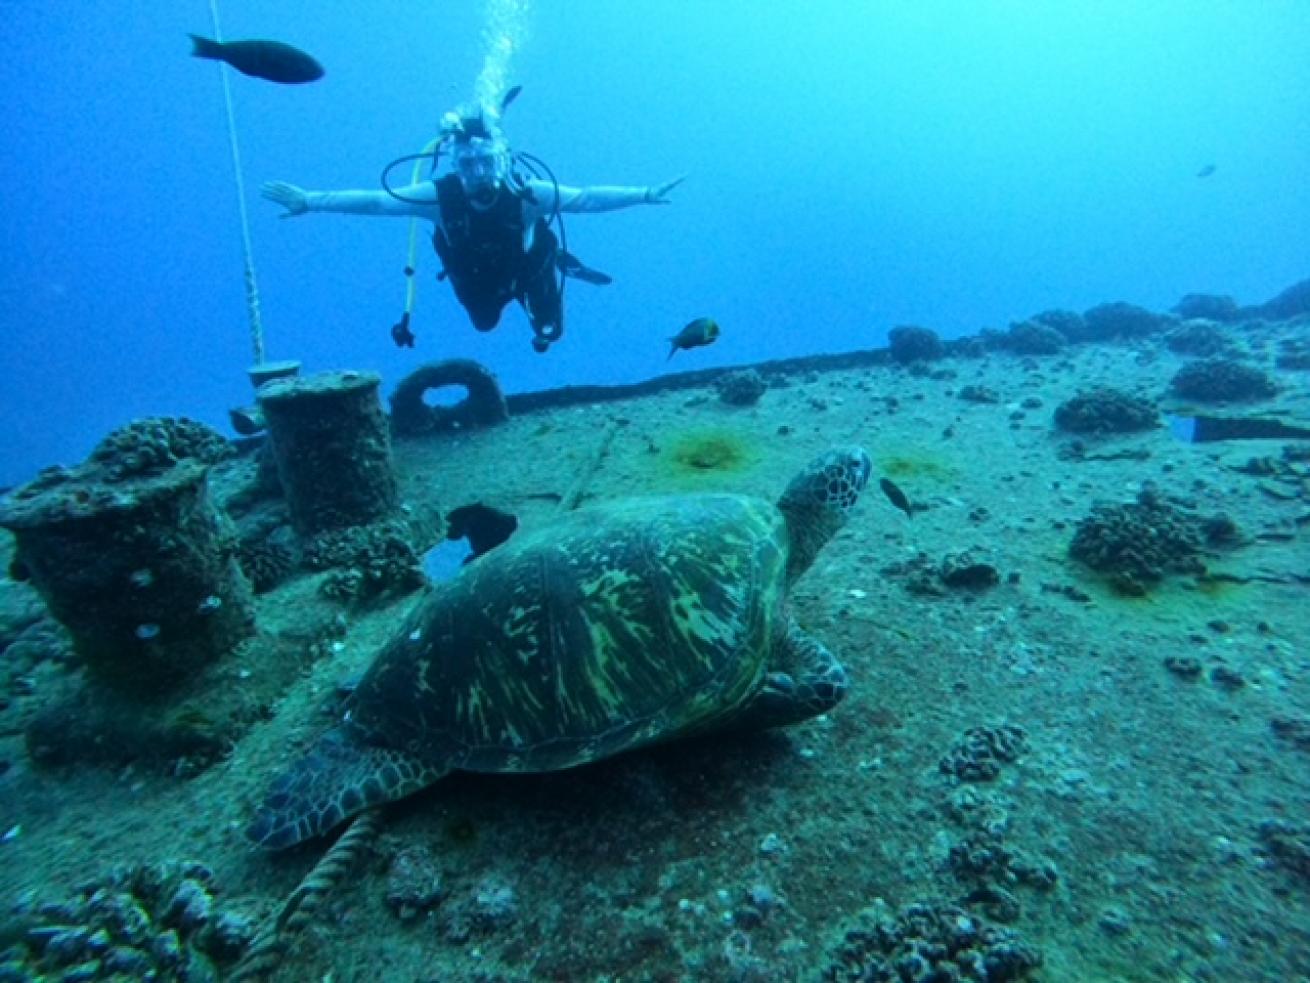 Diver hovers over a wreck with a sea turtle in the foreground.